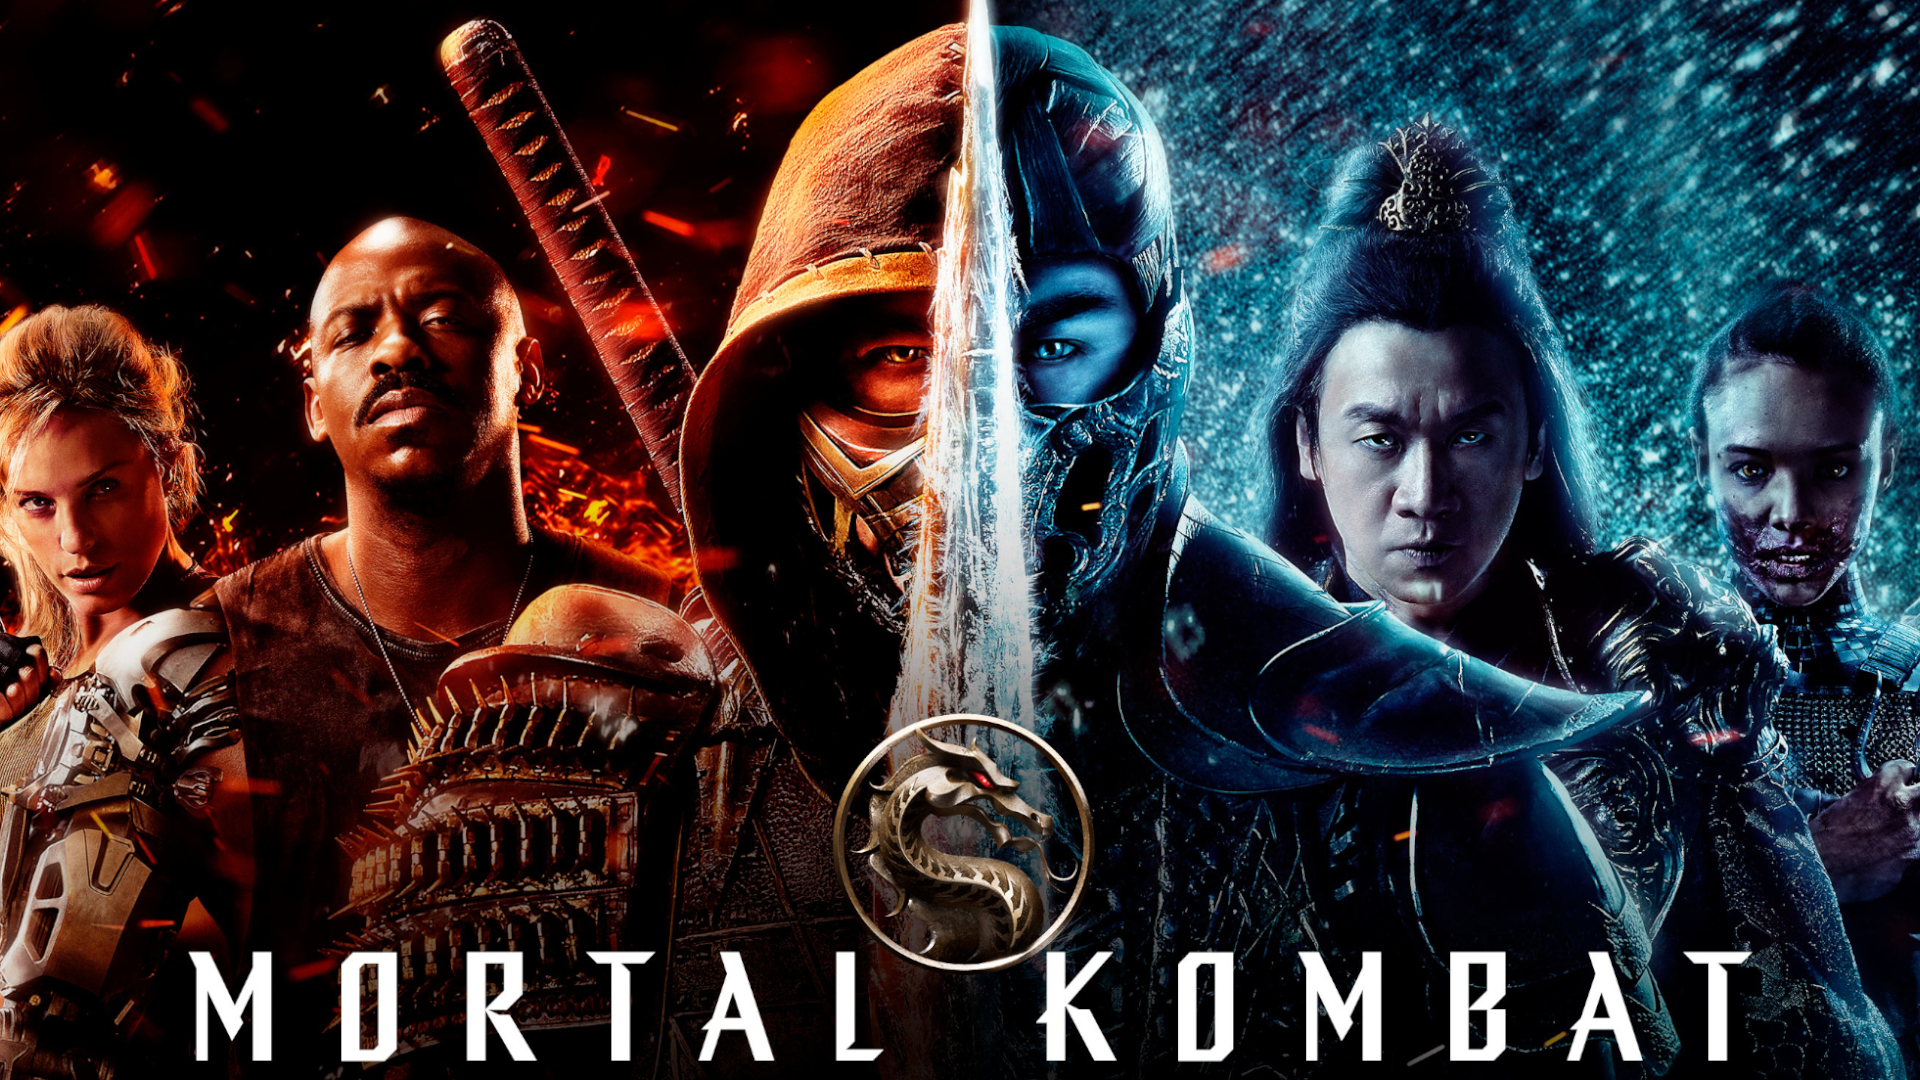 How to Watch Mortal Kombat on HBO Max outside US?